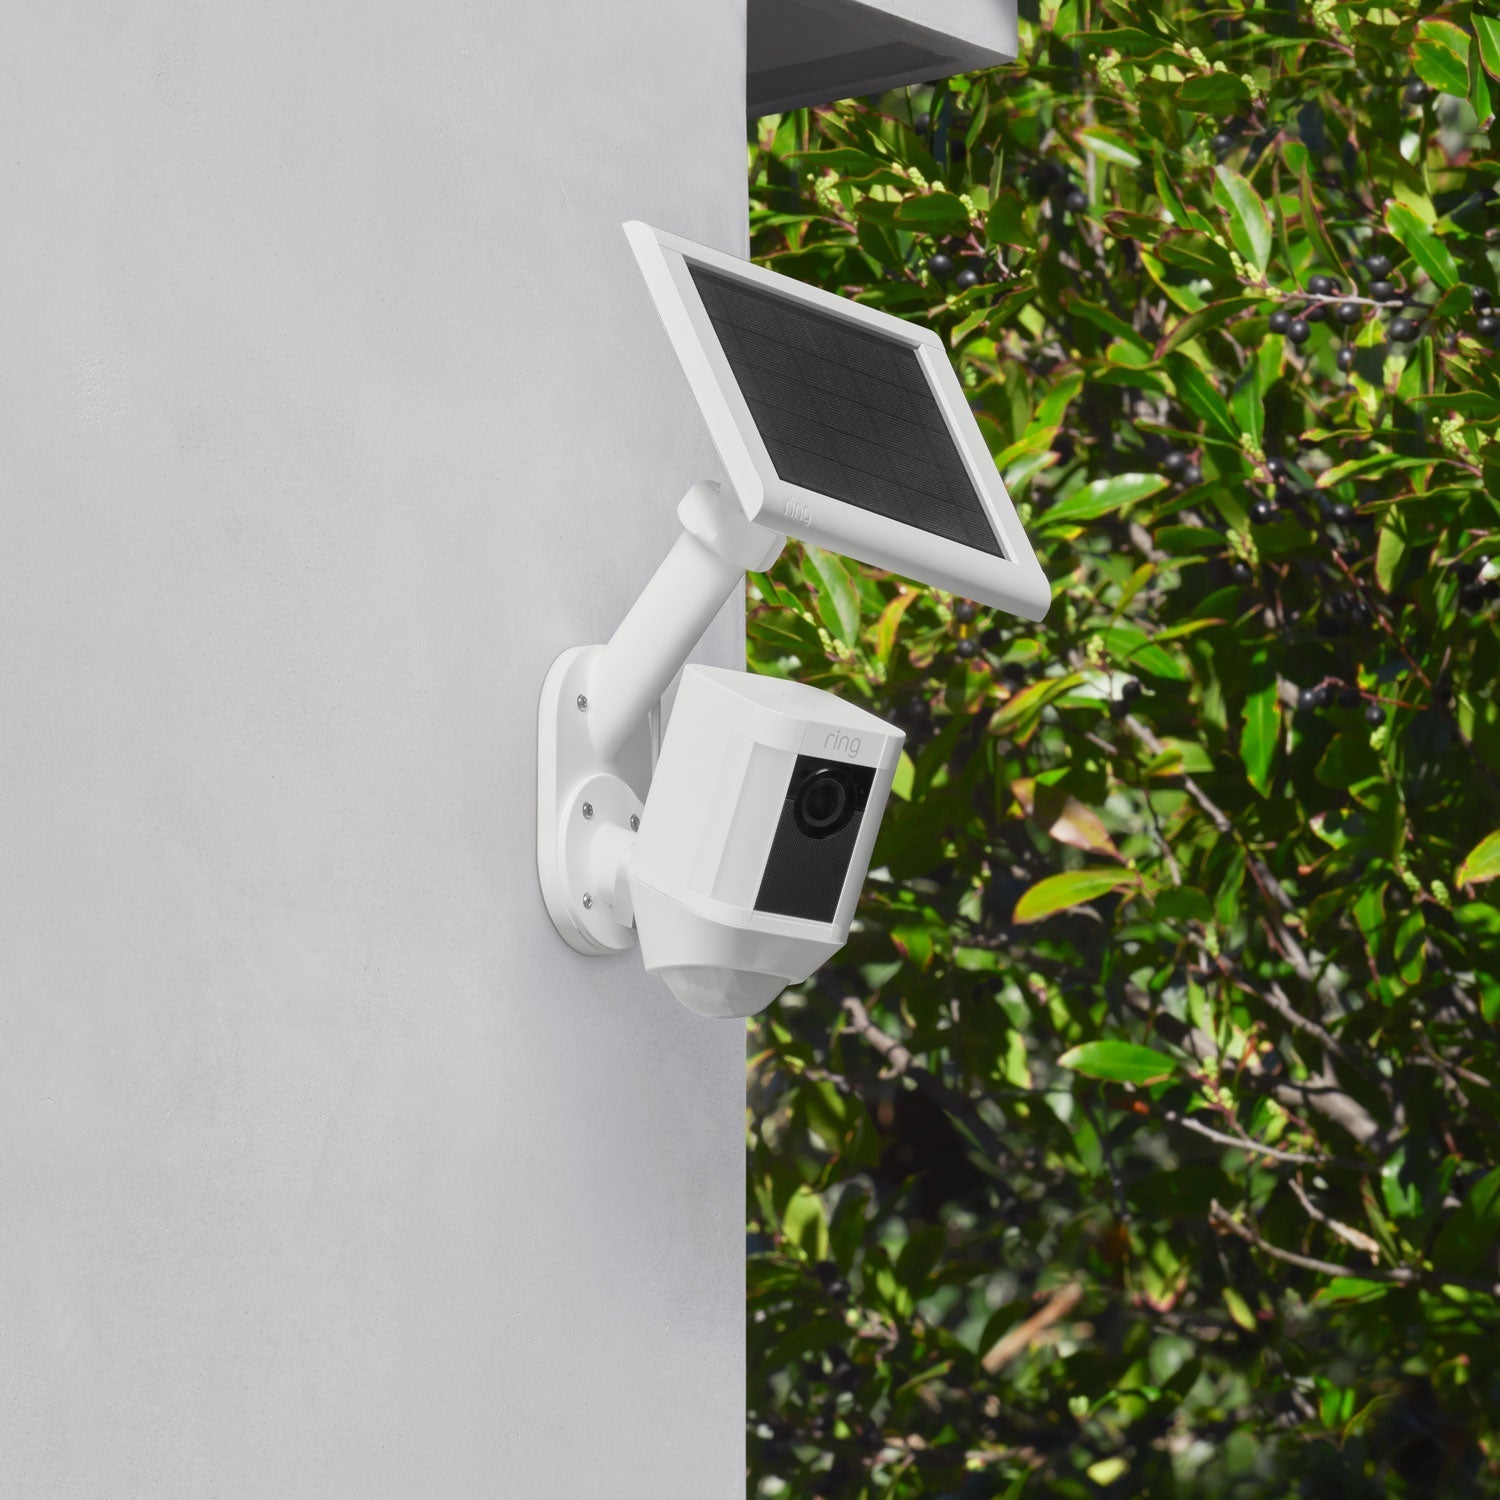 Wall Mount for Solar Panels and Cams - Wall Mount for Solar Panels and Cams in white with Spotlight Cam installed on exterior corner of home.